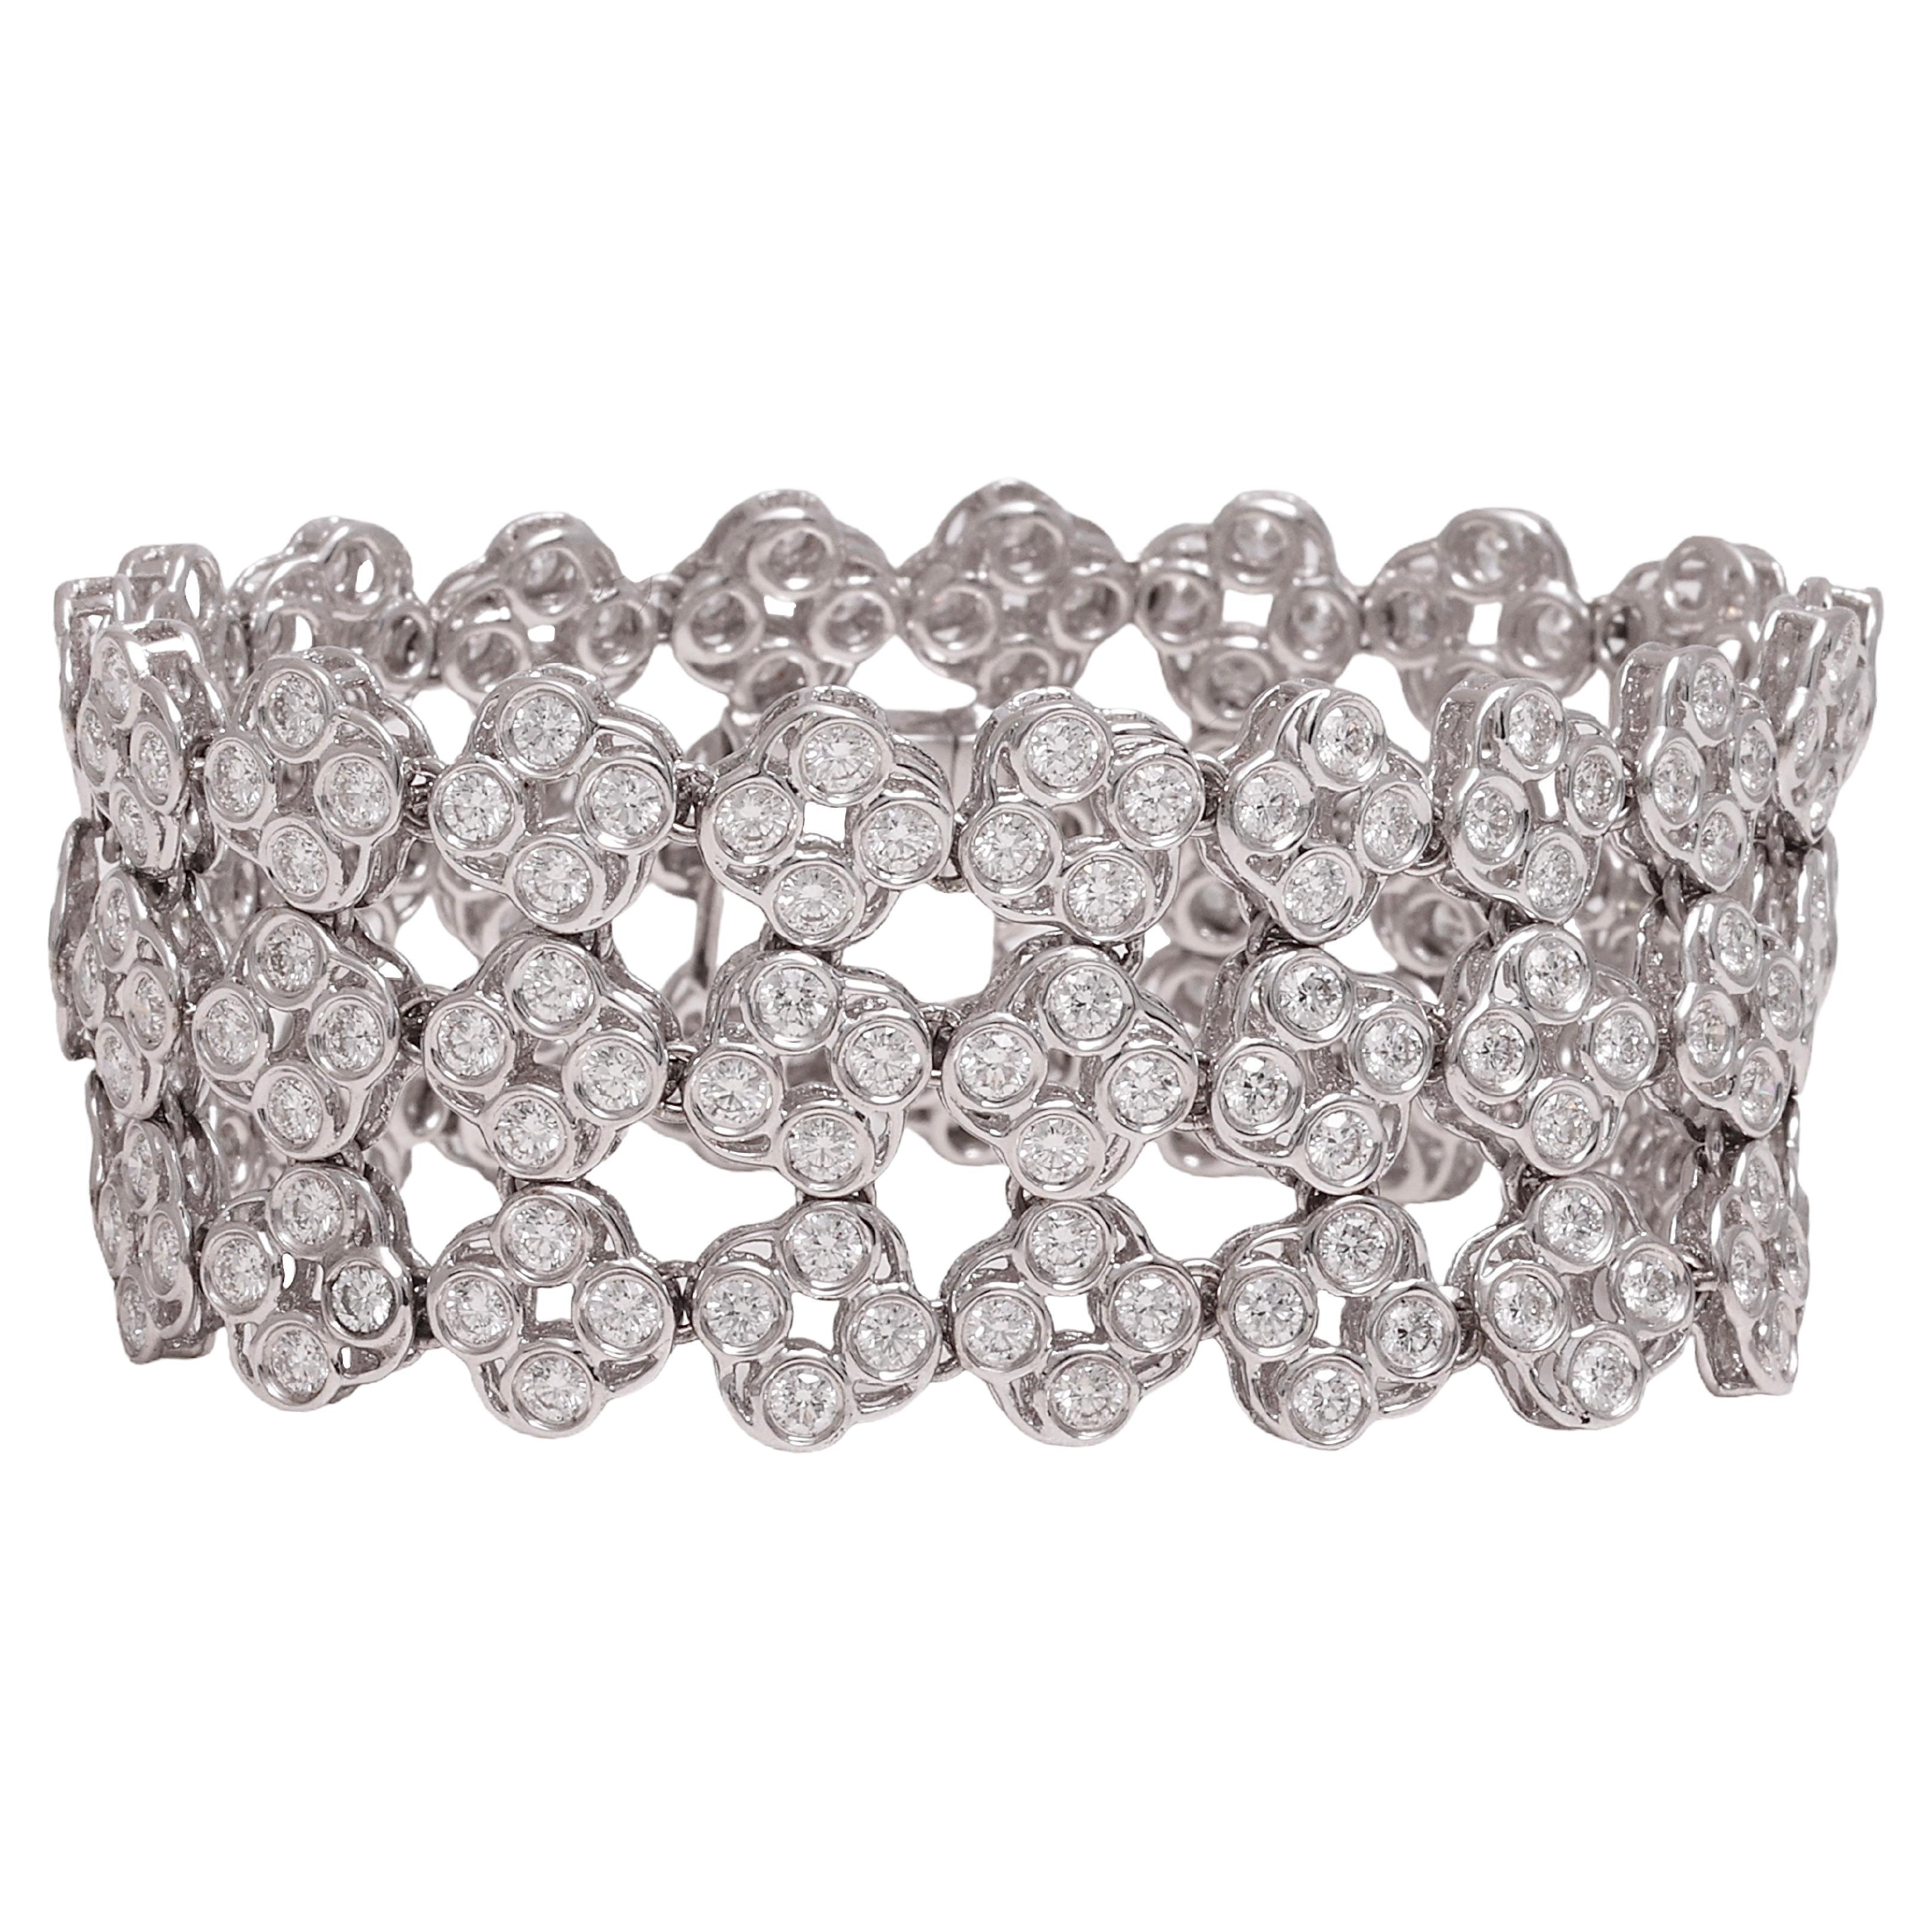 18 kt. White Gold 3 Row Tennis Bracelet With 10.57 ct. Round Cut Diamonds For Sale